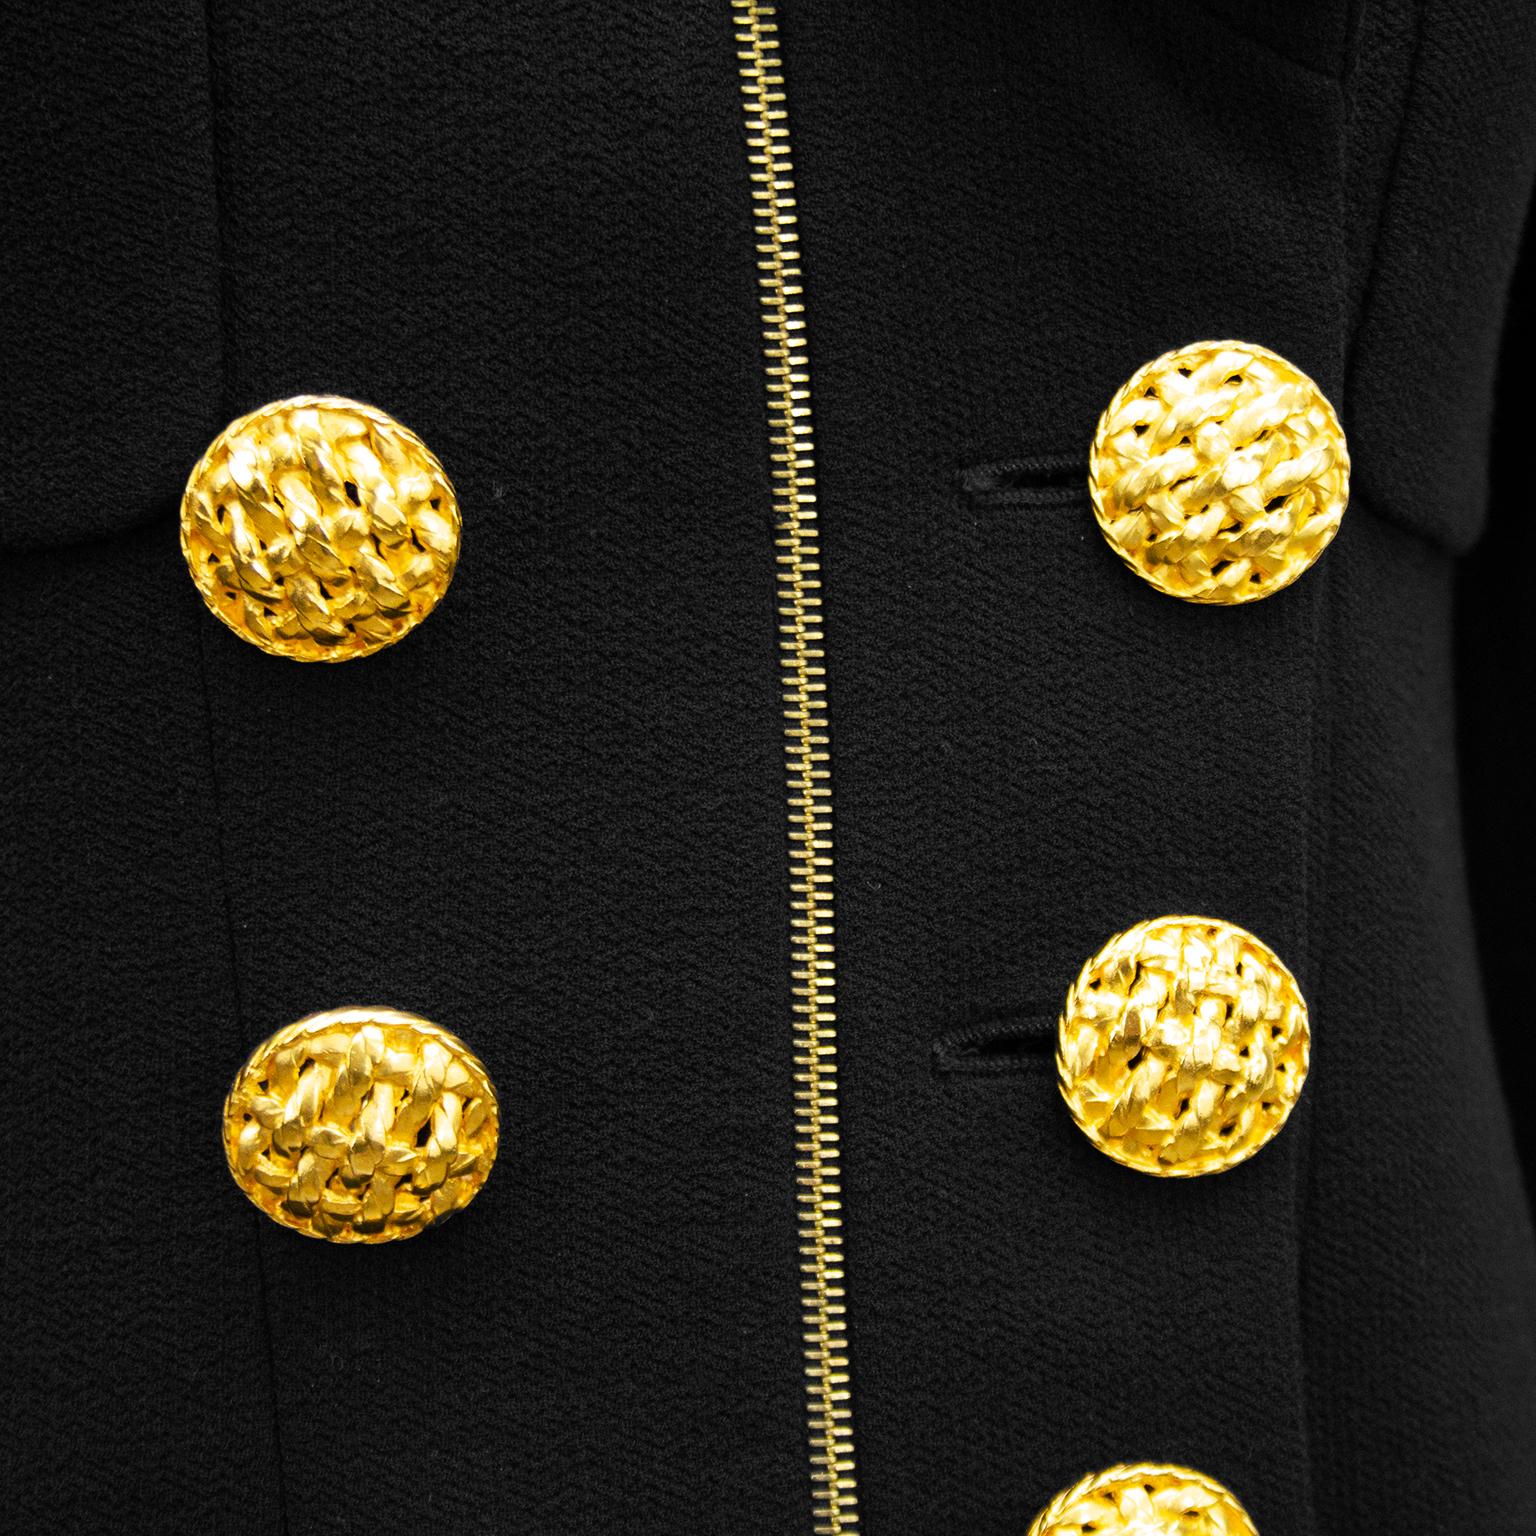 1990s Chanel Black Wool Skirt Suit with Large Gold Buttons  2